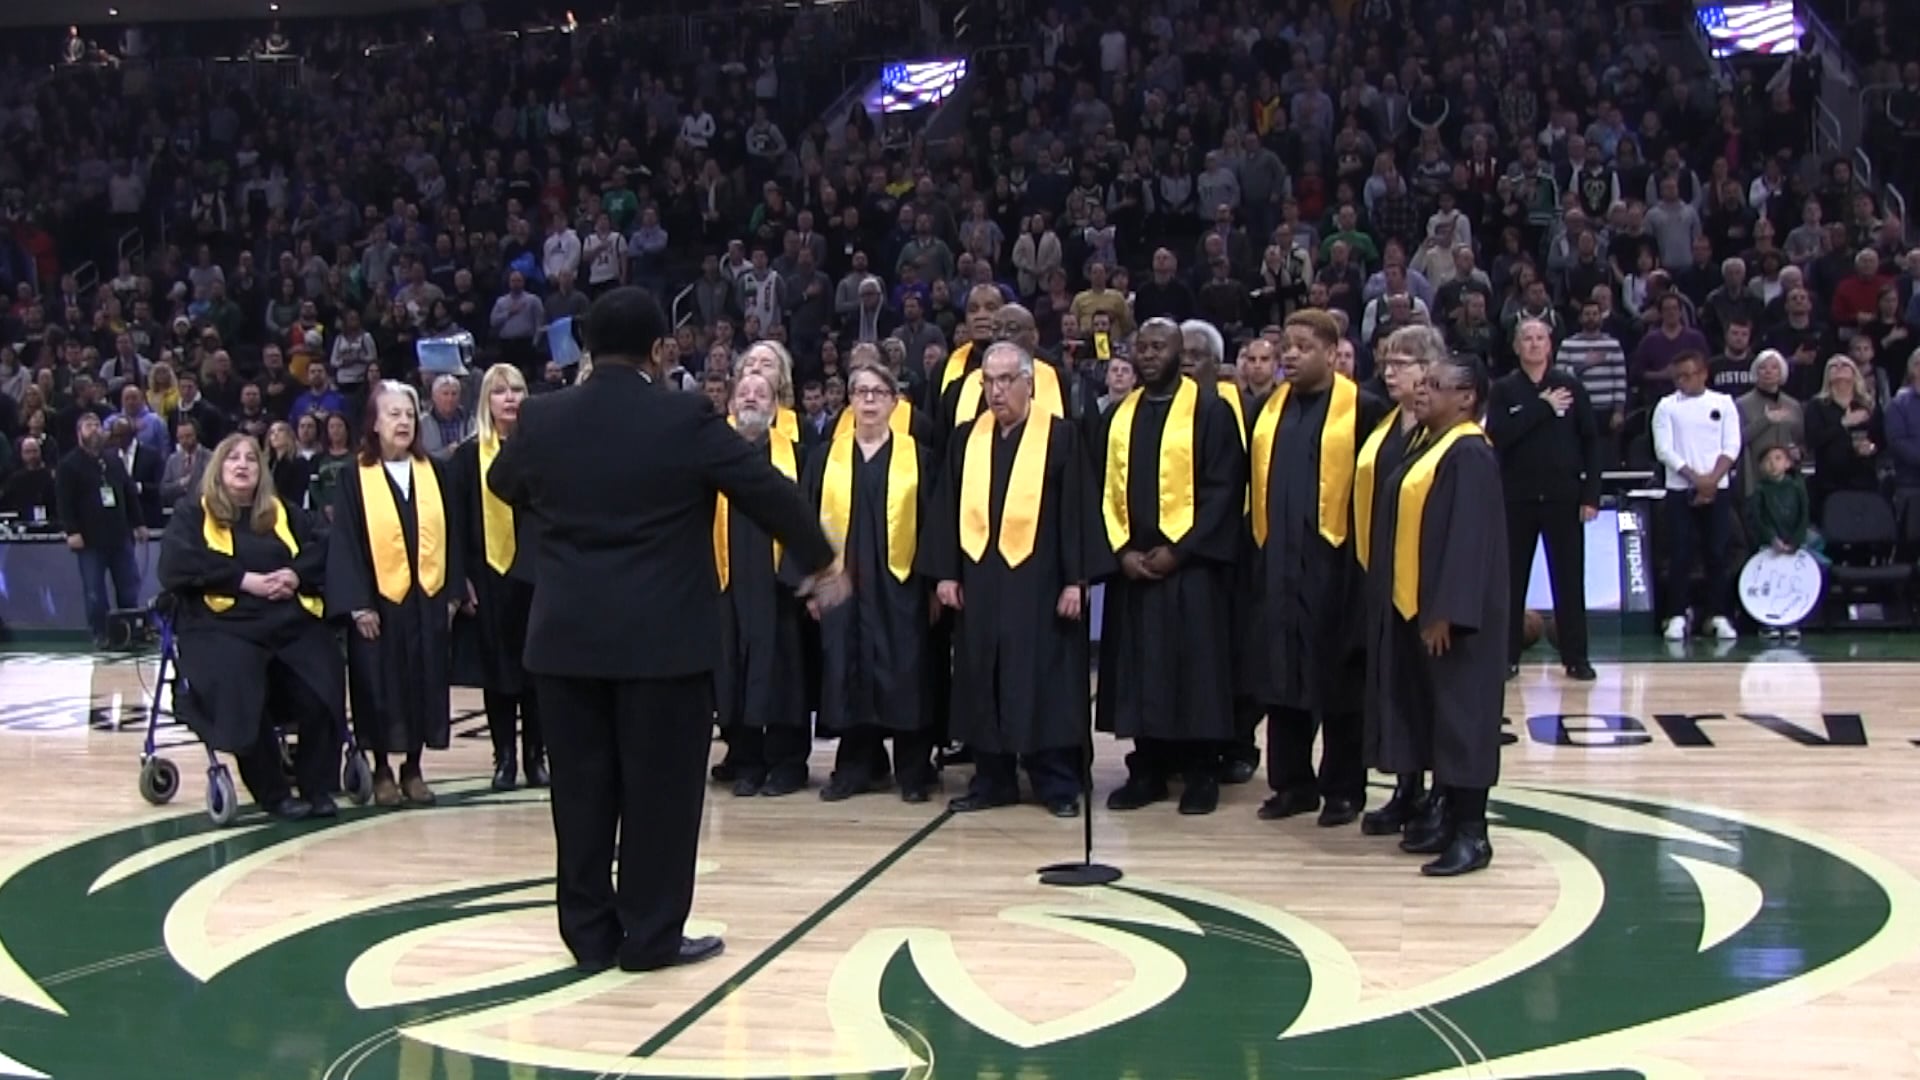 MPS Community Gospel Choir: National Anthem and Oh, Freedom